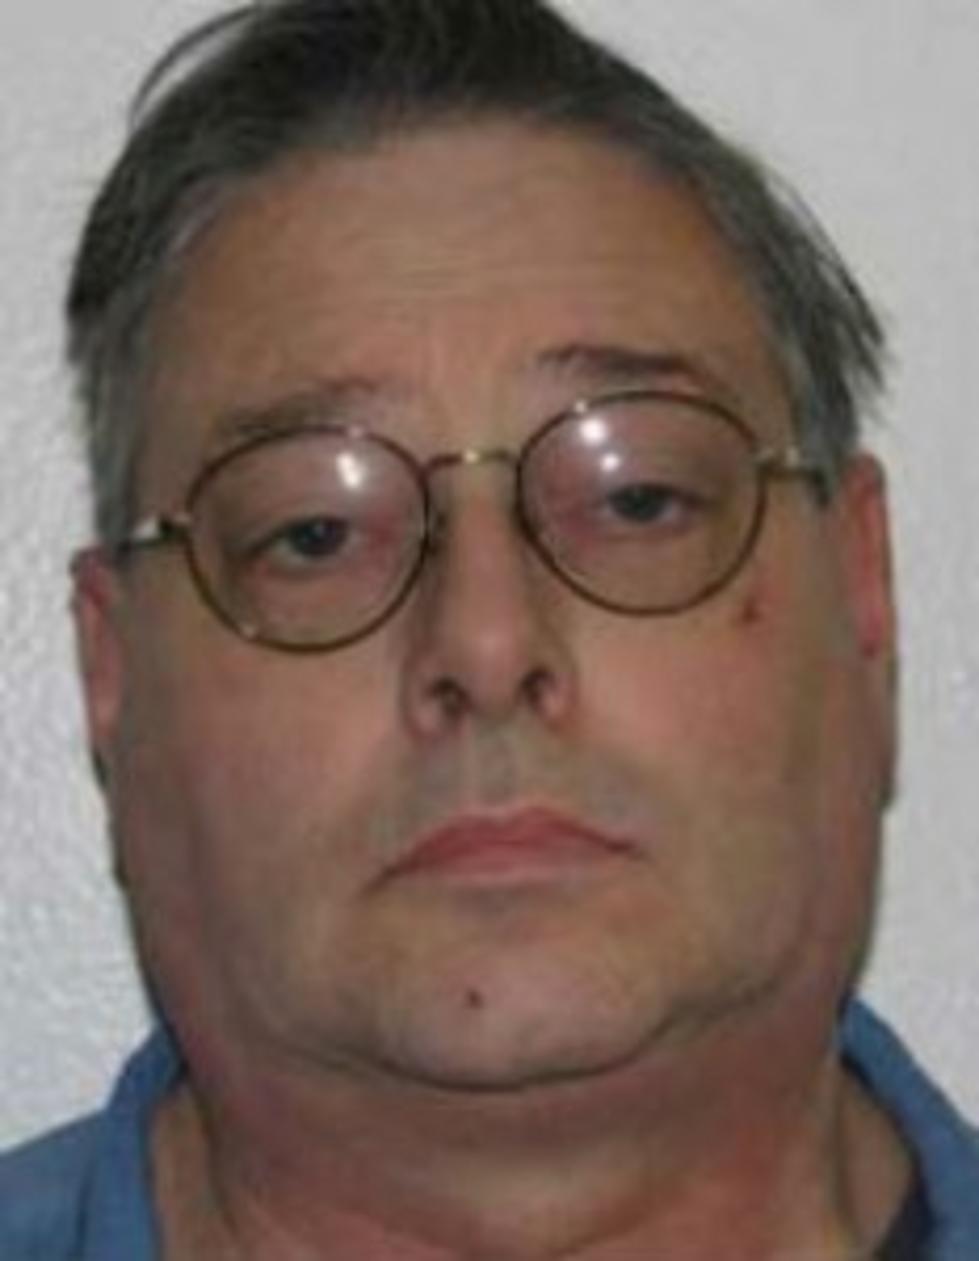 Oregon Death Row Inmate Died of Natural Causes, Say Authorities